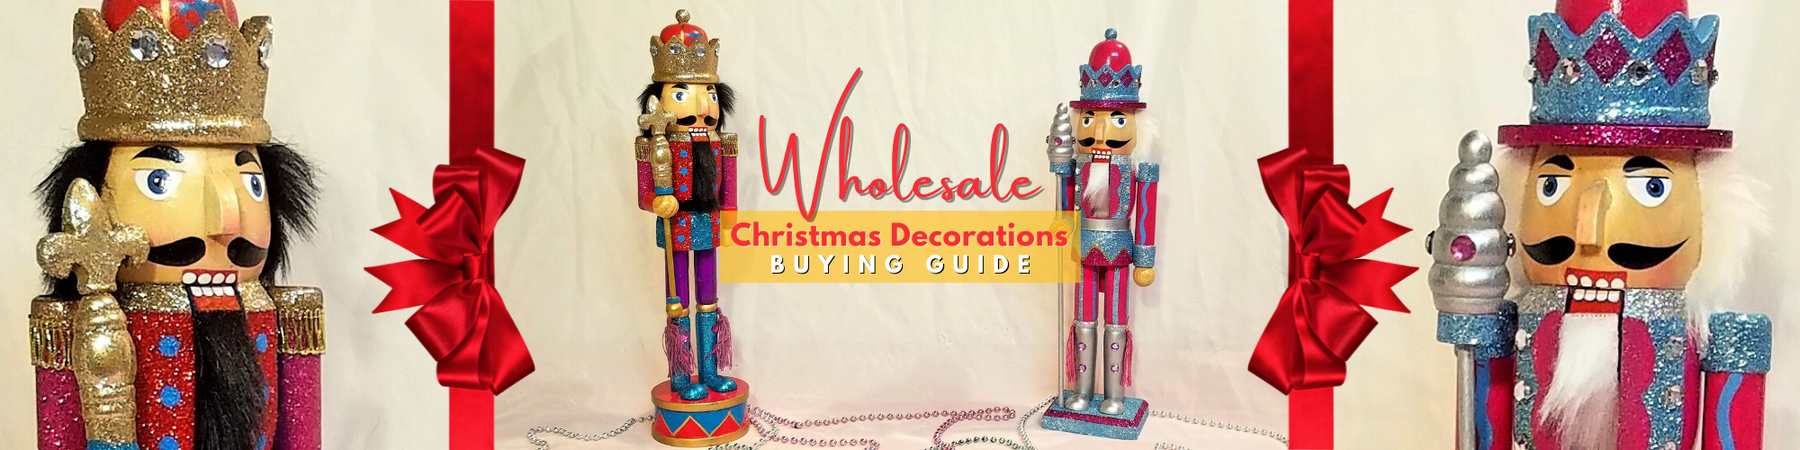 Wholesale Christmas Decorations Buying Guide